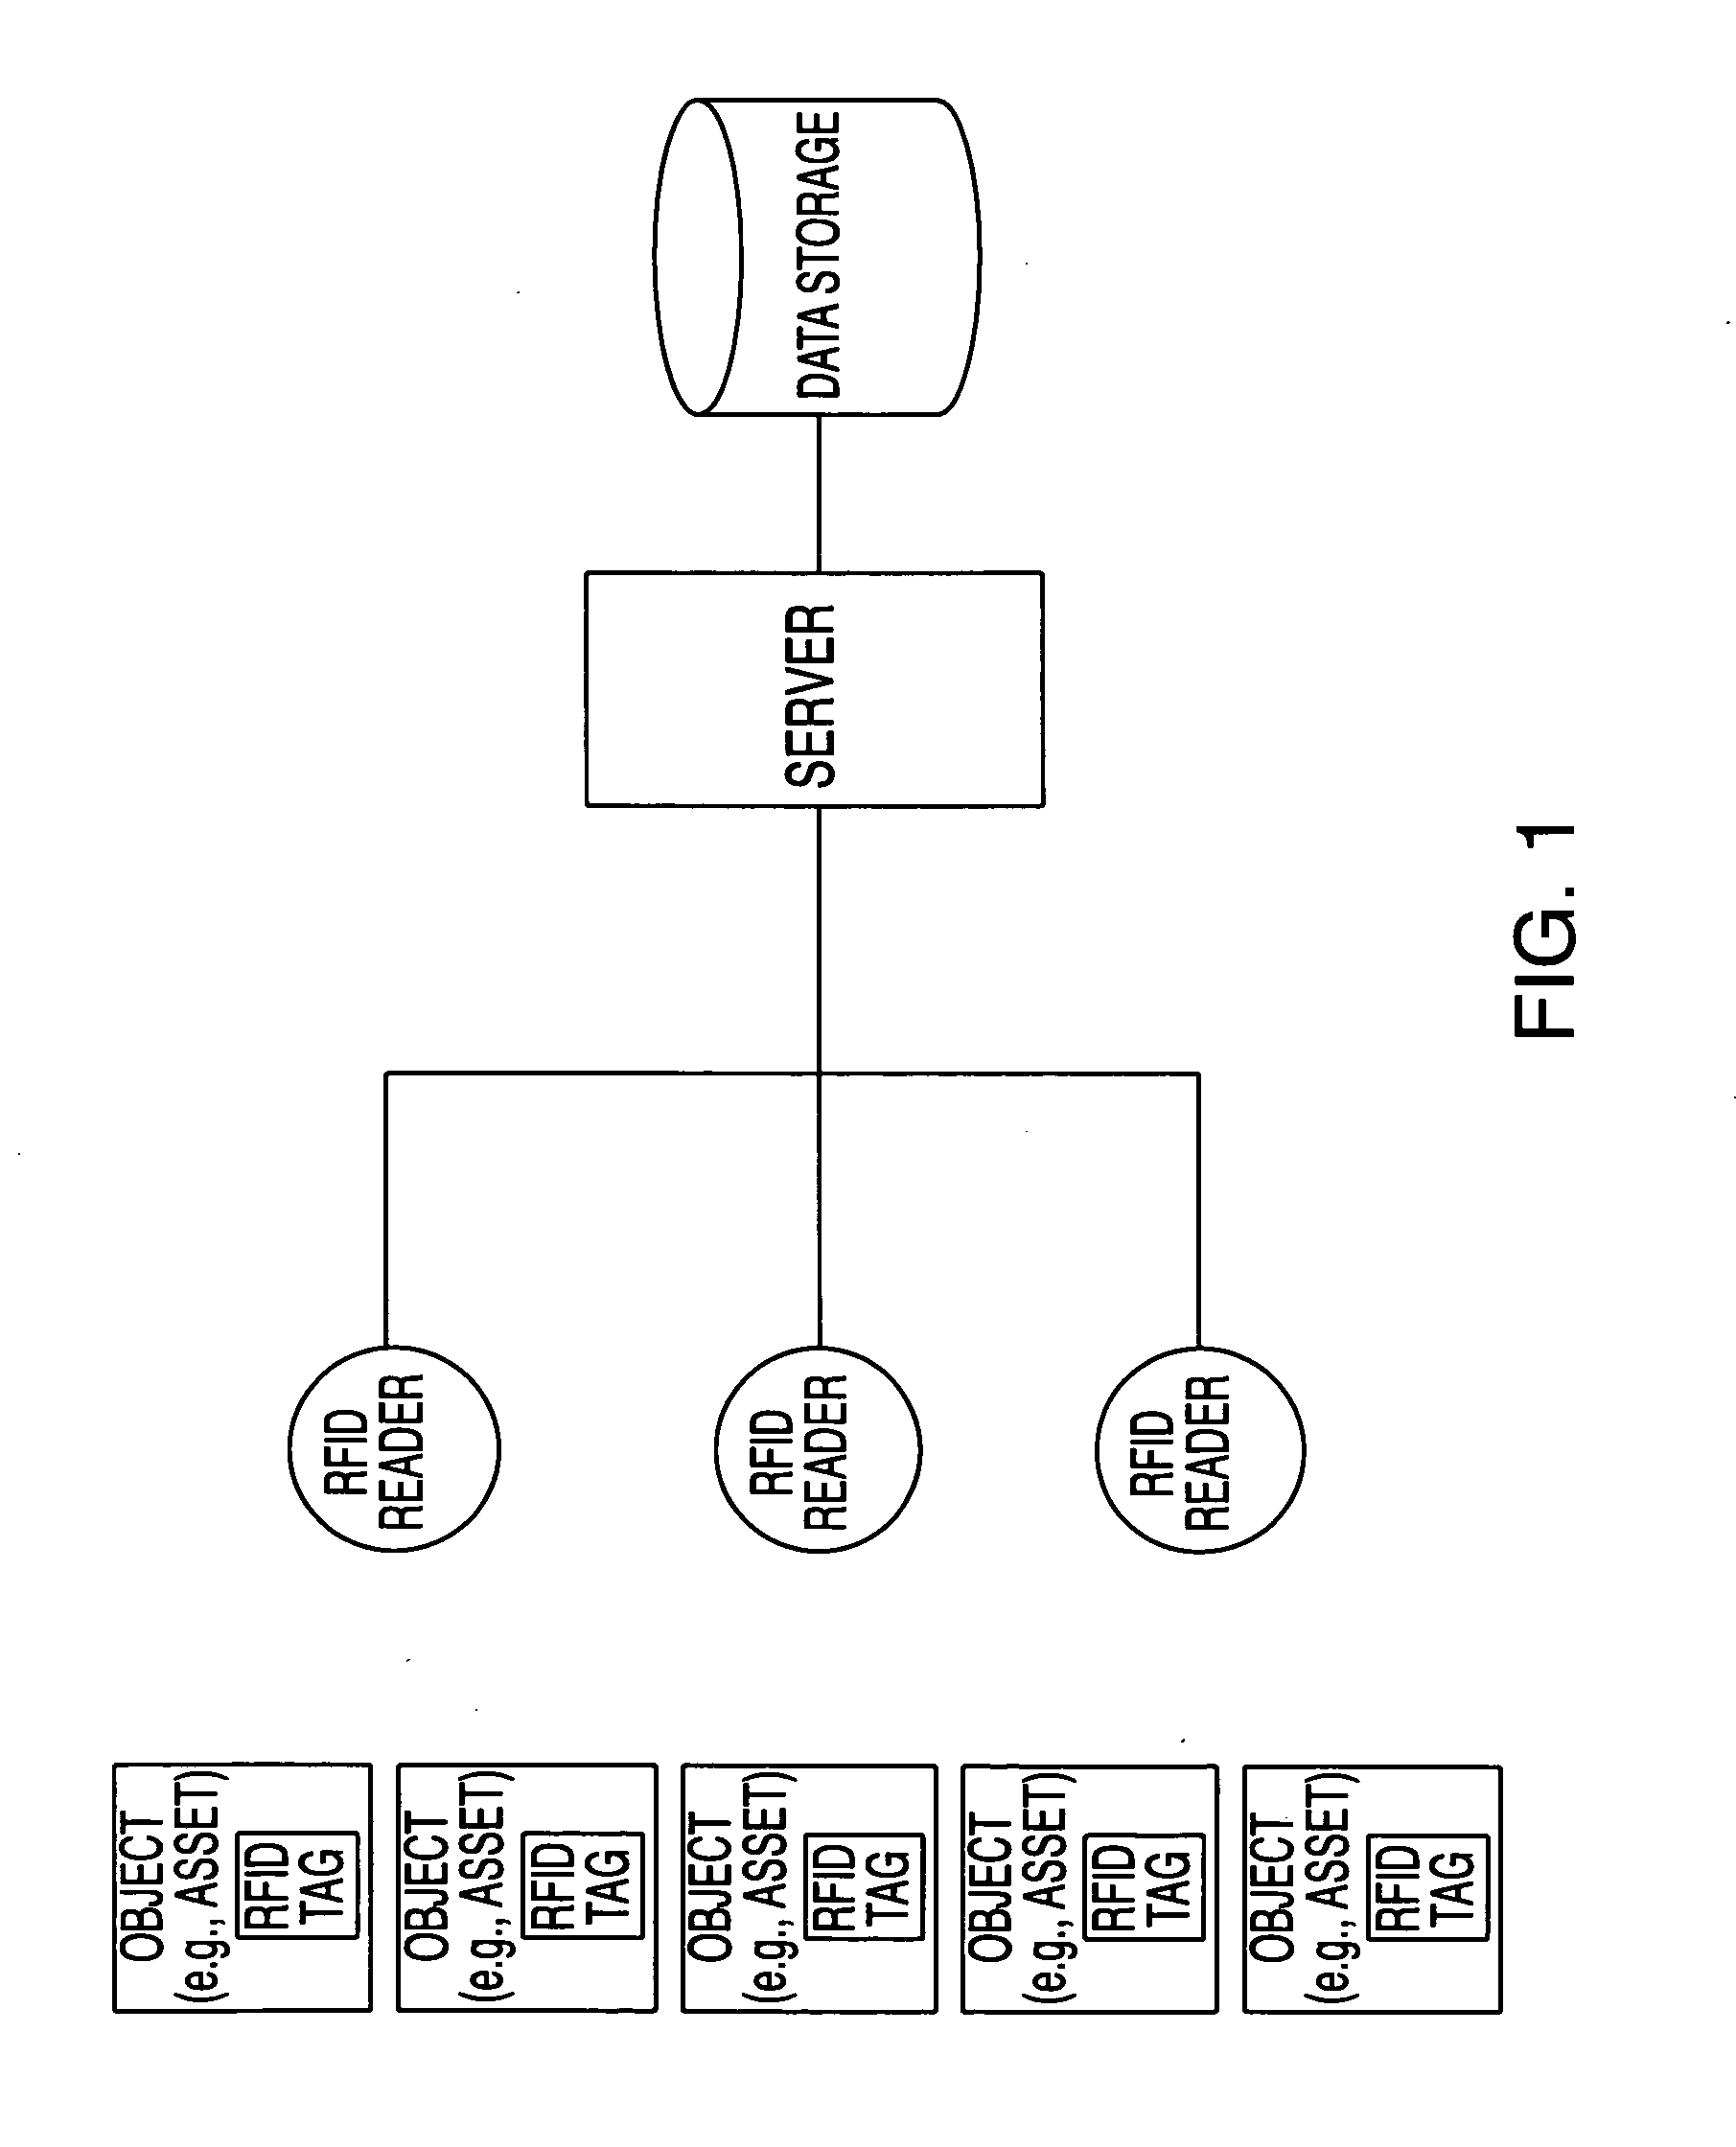 Battery management system with predictive failure analysis